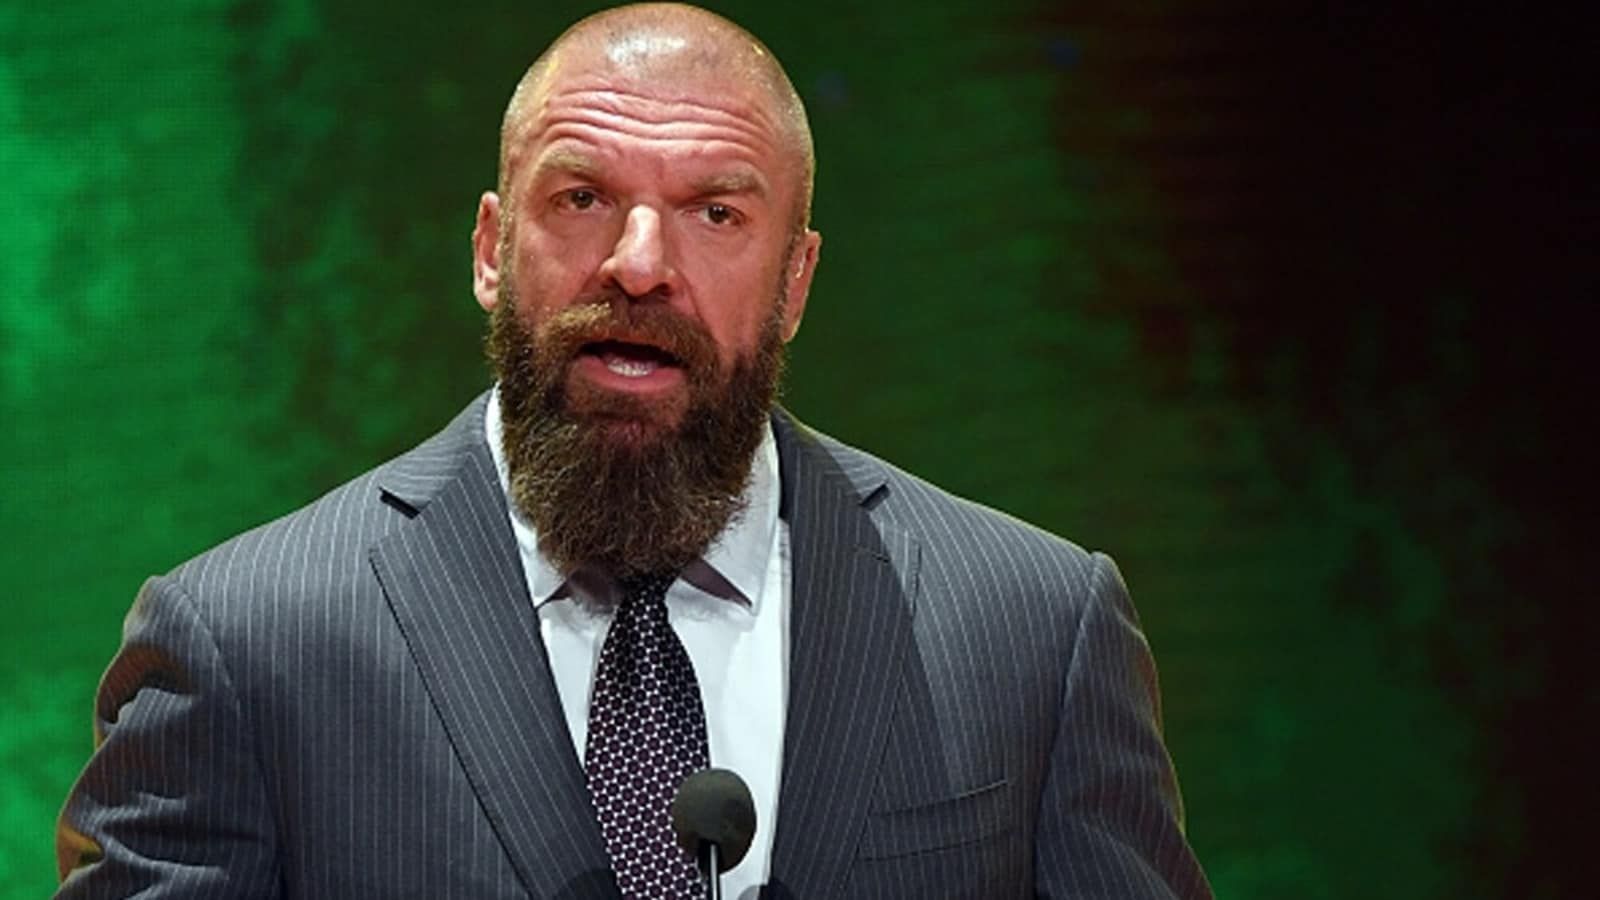 Triple H recently retired from in-ring competition